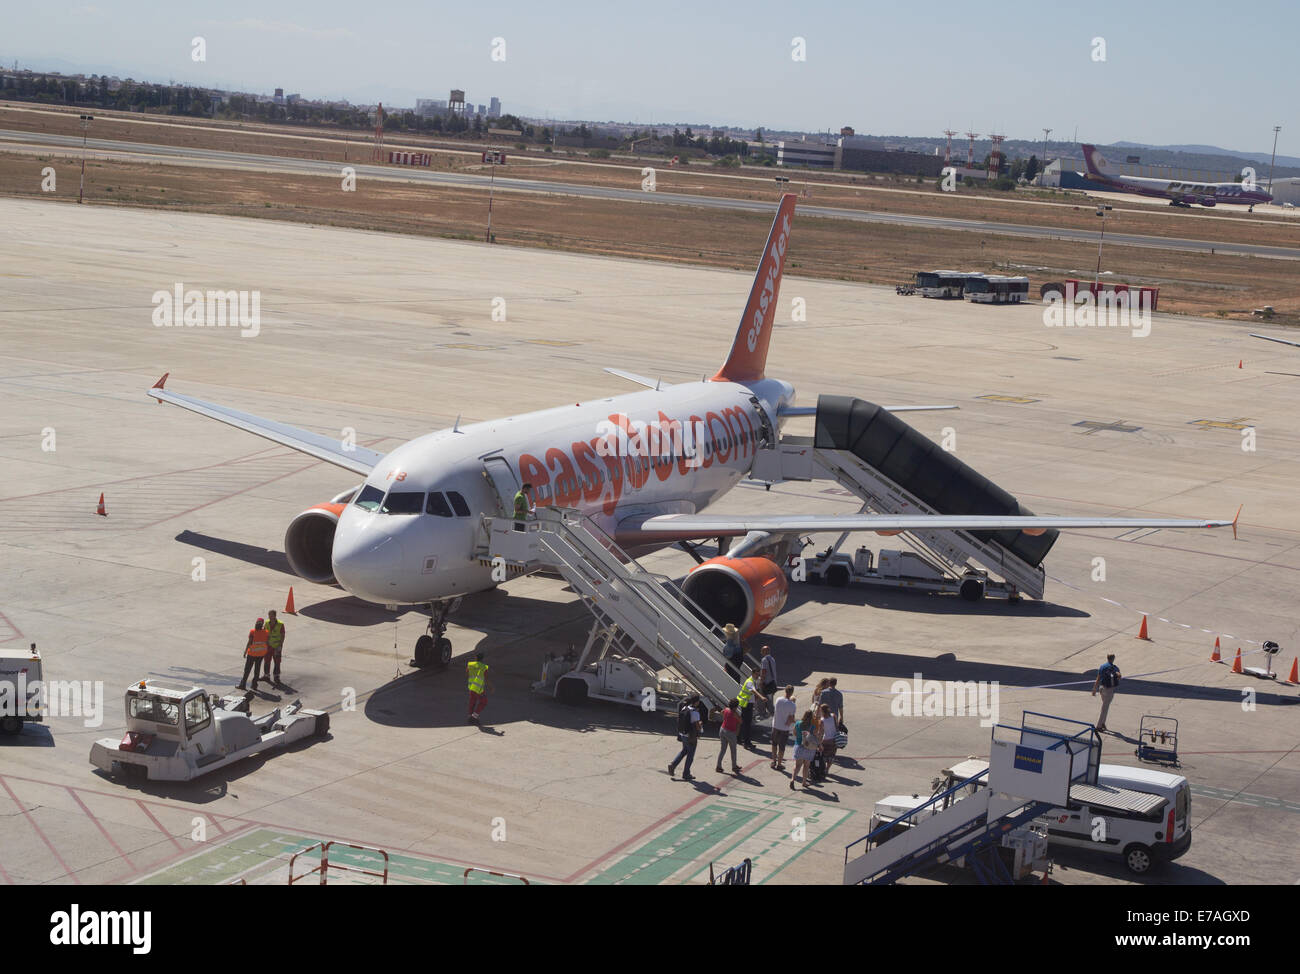 Valencia, Spain. 11th September, 2014. An EasyJet airliner at the Valencia Airport. EasyJet is a British airline carrier based at London Luton Airport.  It is the largest airline of the United Kingdom, by number of passengers carried, operating domestic and international scheduled services on over 600 routes in 32 countries. Stock Photo